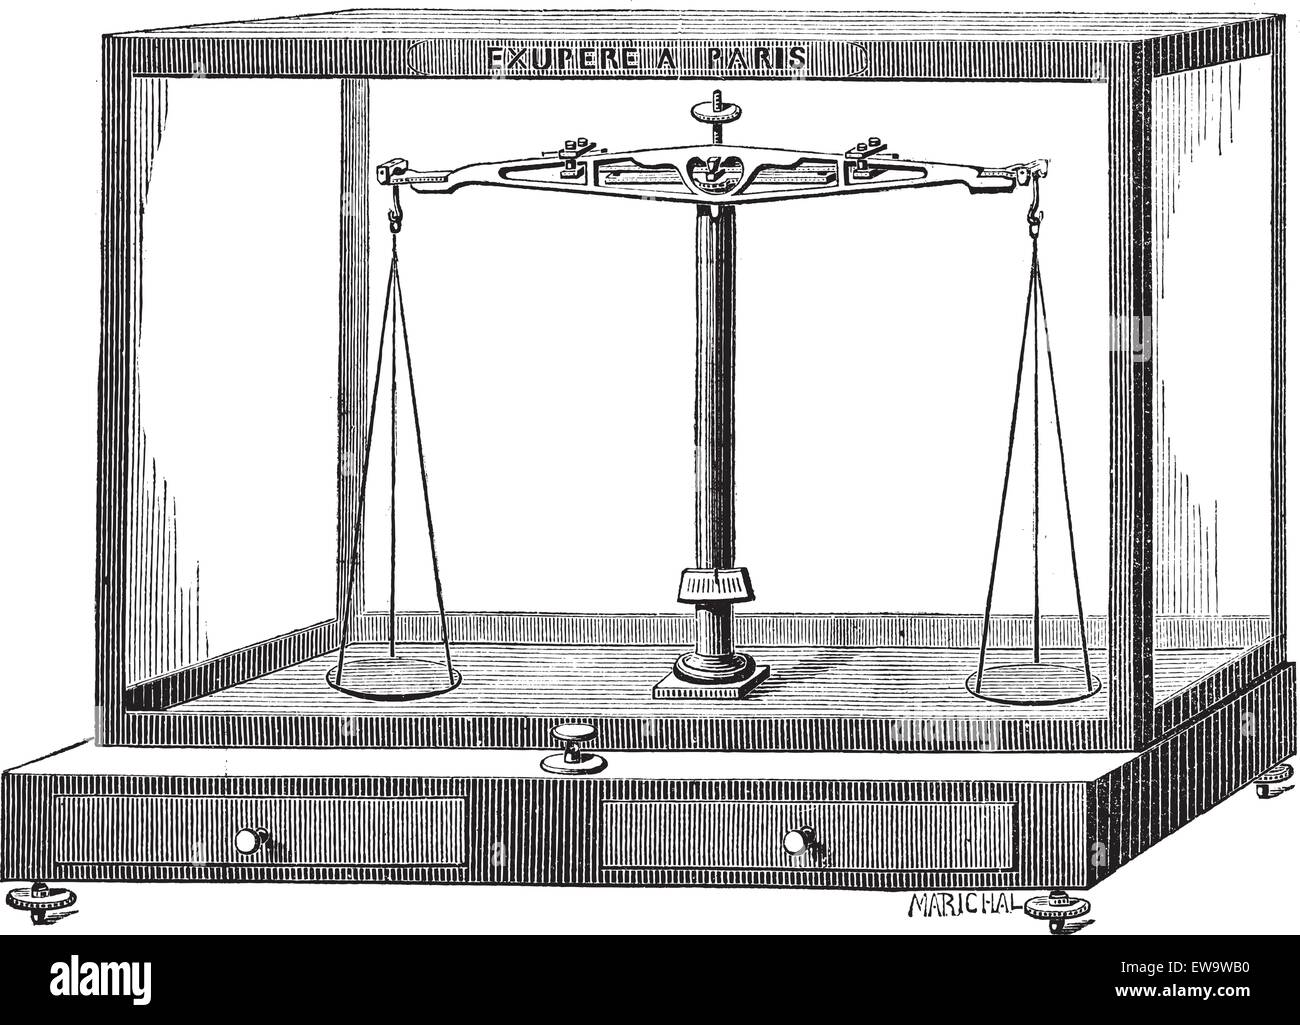 Old engraved illustration of Analytical balance scale isolated on a white background. Industrial encyclopedia E.-O. Lami - 1875. Stock Vector